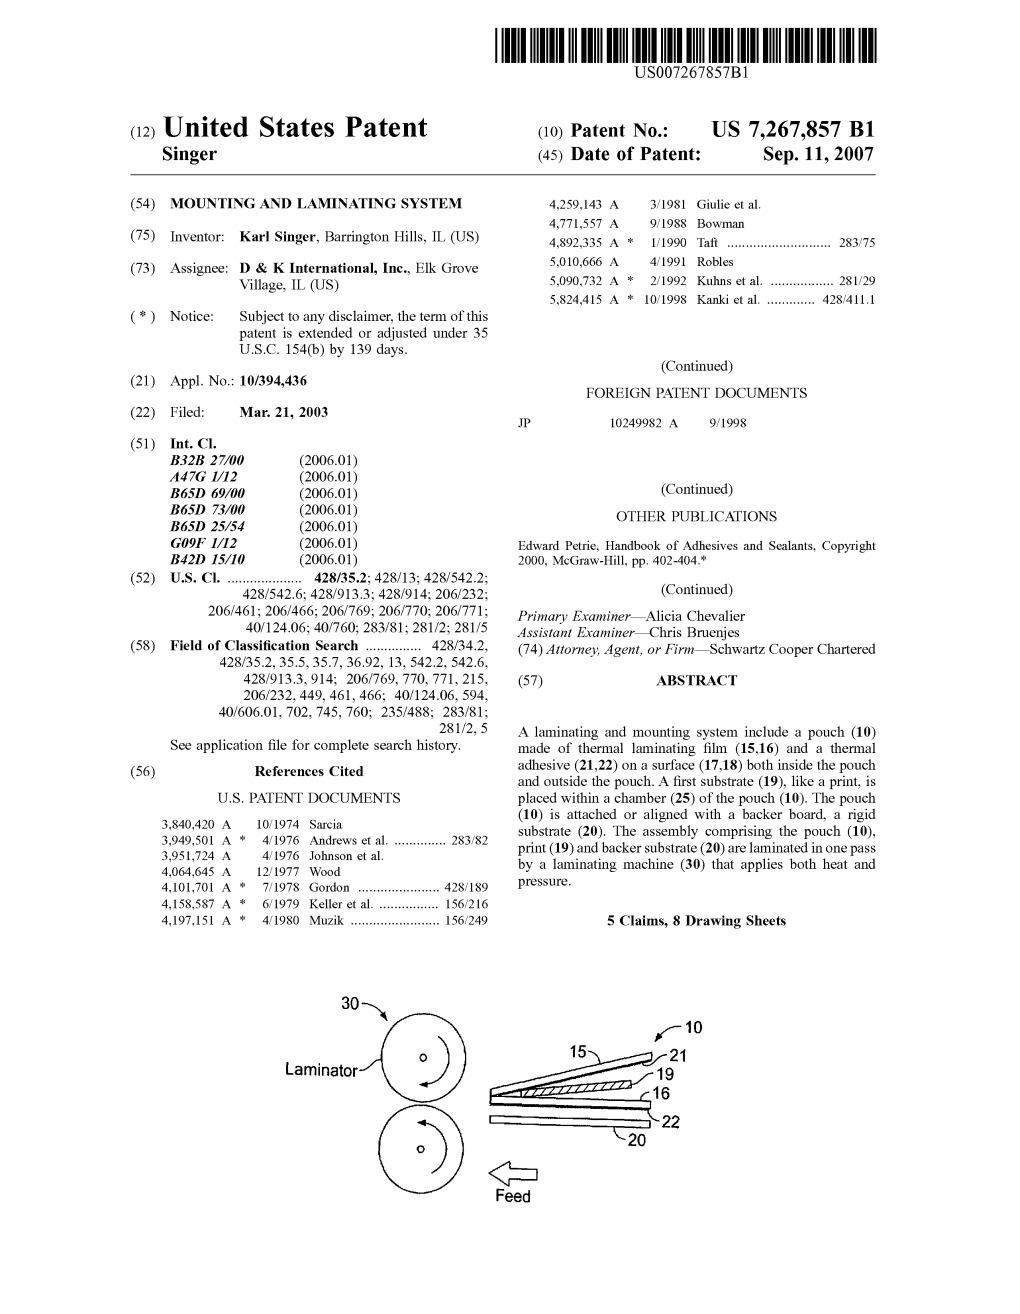 (12) Ulllted States Patent (10) Patent N0.: US 7,267,857 B1 Singer (45) Date of Patent: Sep